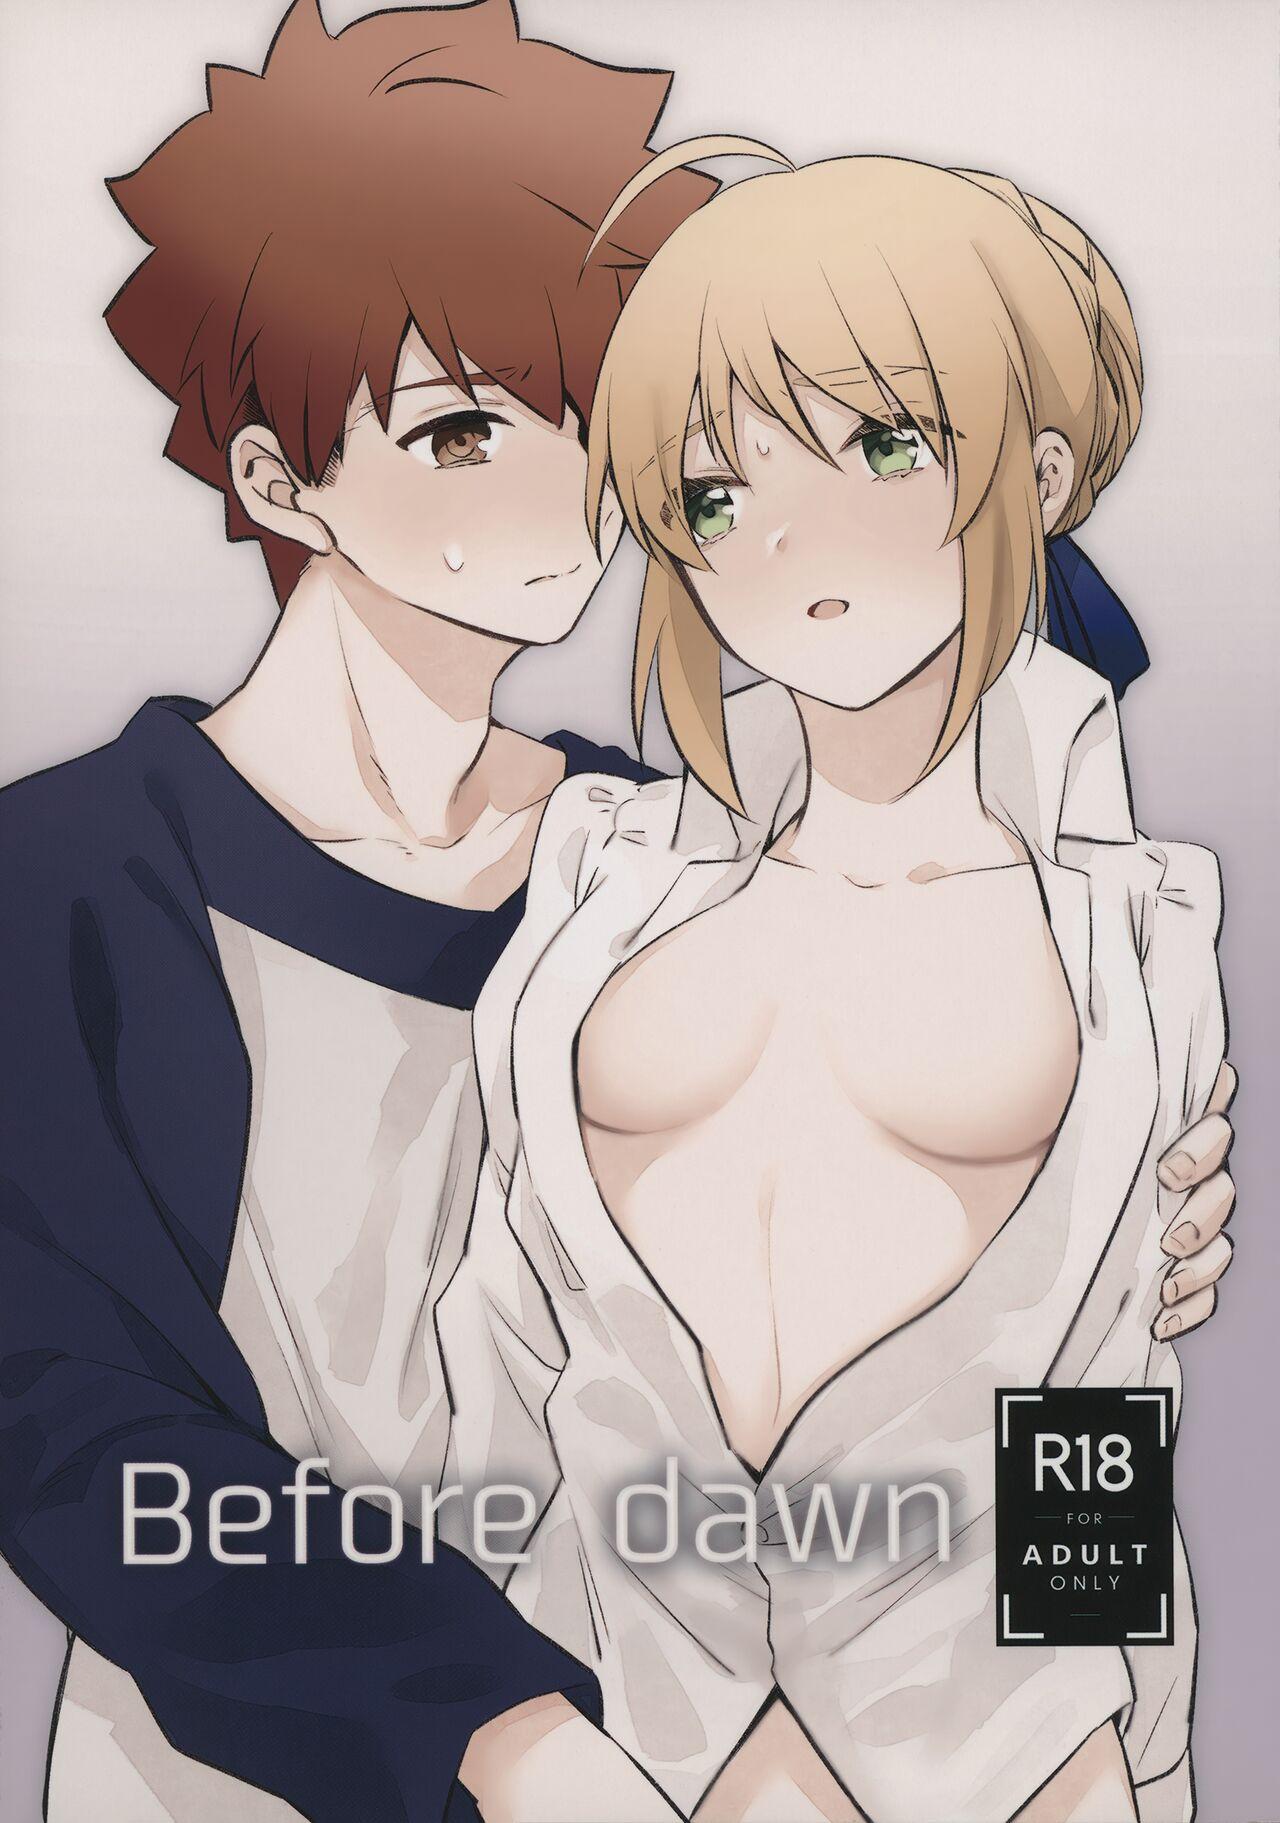 Made Before dawn - Fate stay night Amateur Porn Free - Page 1